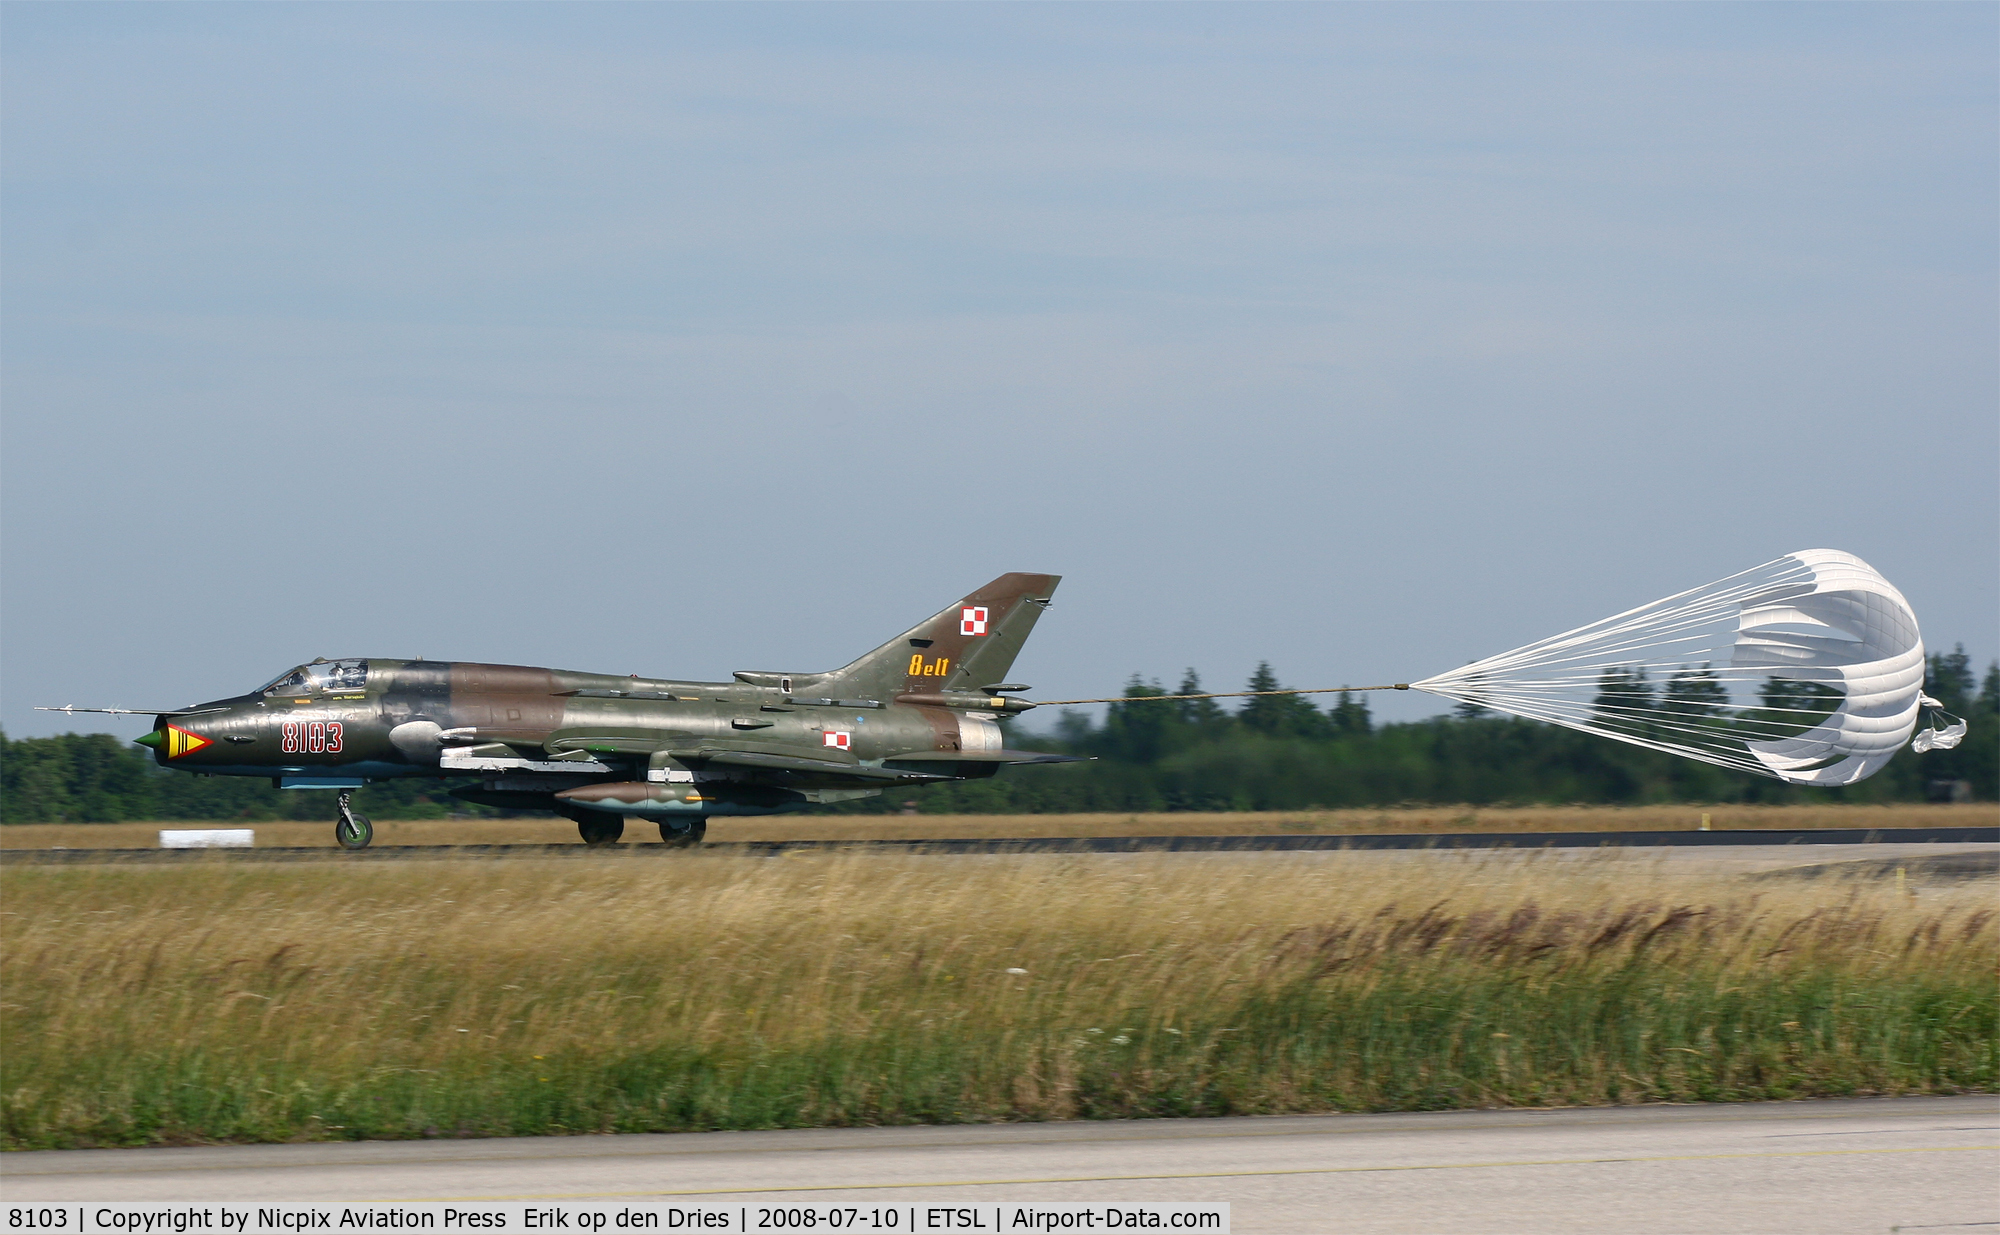 8103, Sukhoi Su-22M-4 C/N 28103, Poland participated in ELITE-2008 with Su-22 of 8 Wing. 8103 is seen here while landing at Lechfeld AB.